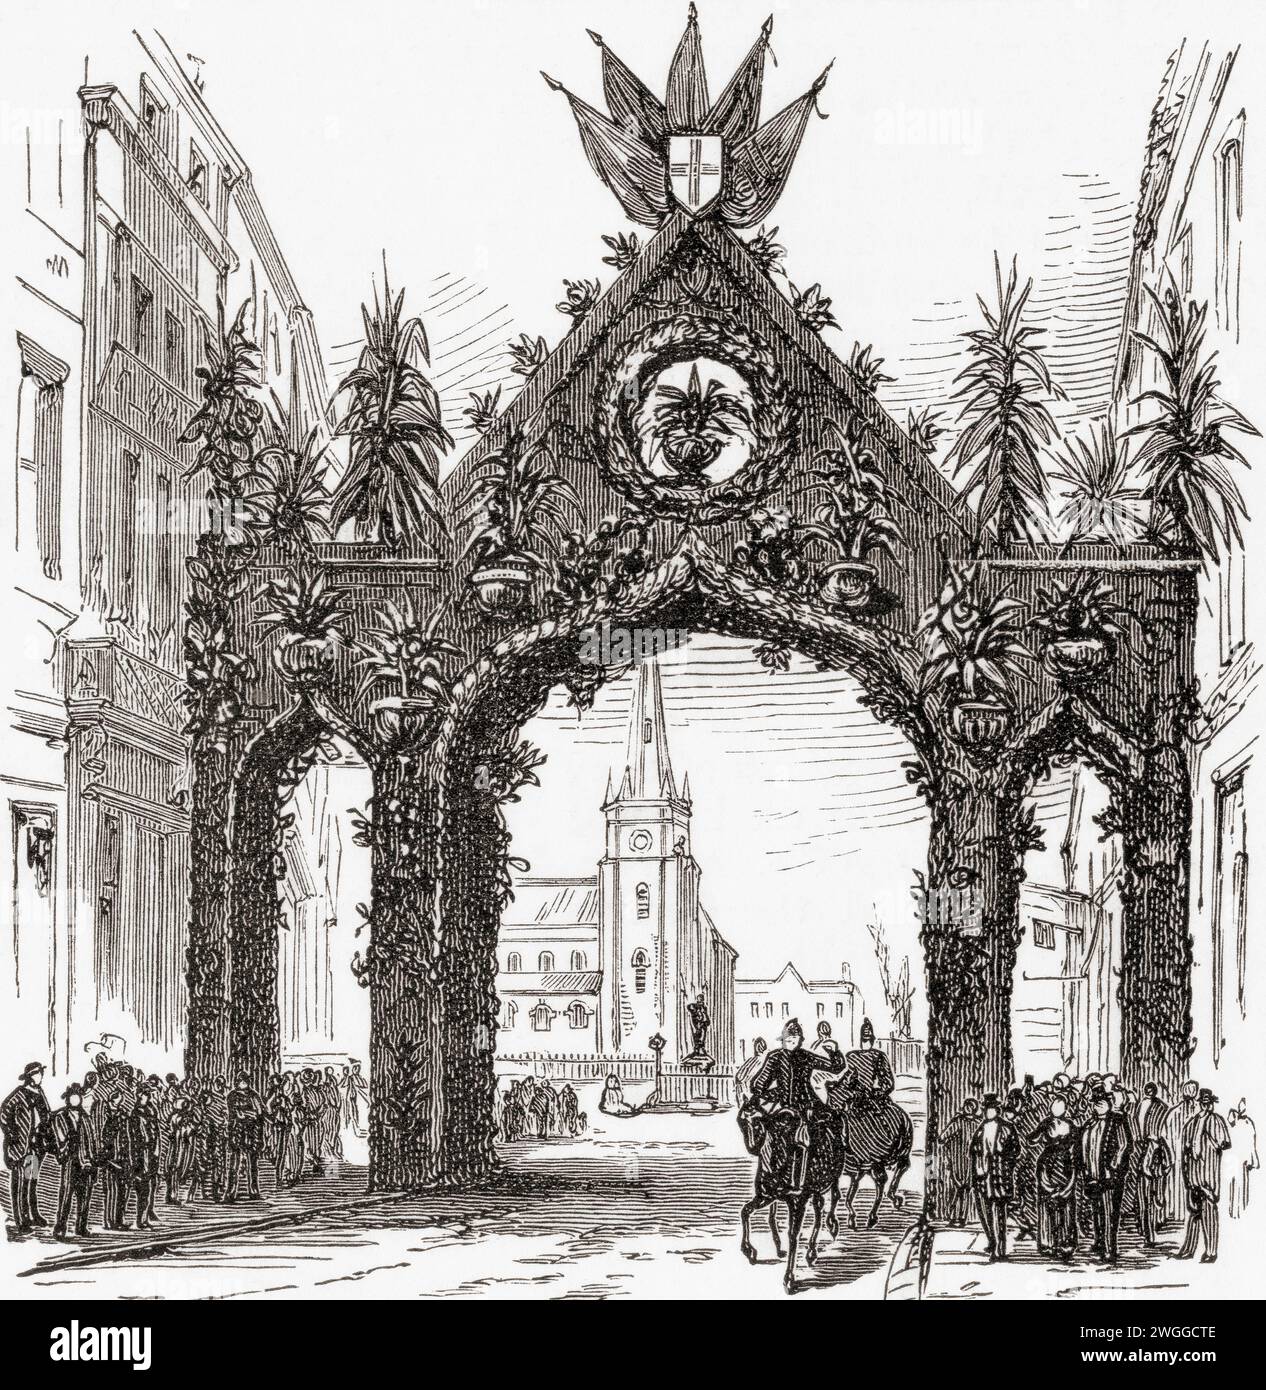 Floral Arch, Bullring, Birmingham, England, erected to mark Queen Victoria's visit to Birmingham on the 23rd March 1887, the year of the Golden Jubilee.  From The London Illustrated News, published March 26, 1887. Stock Photo